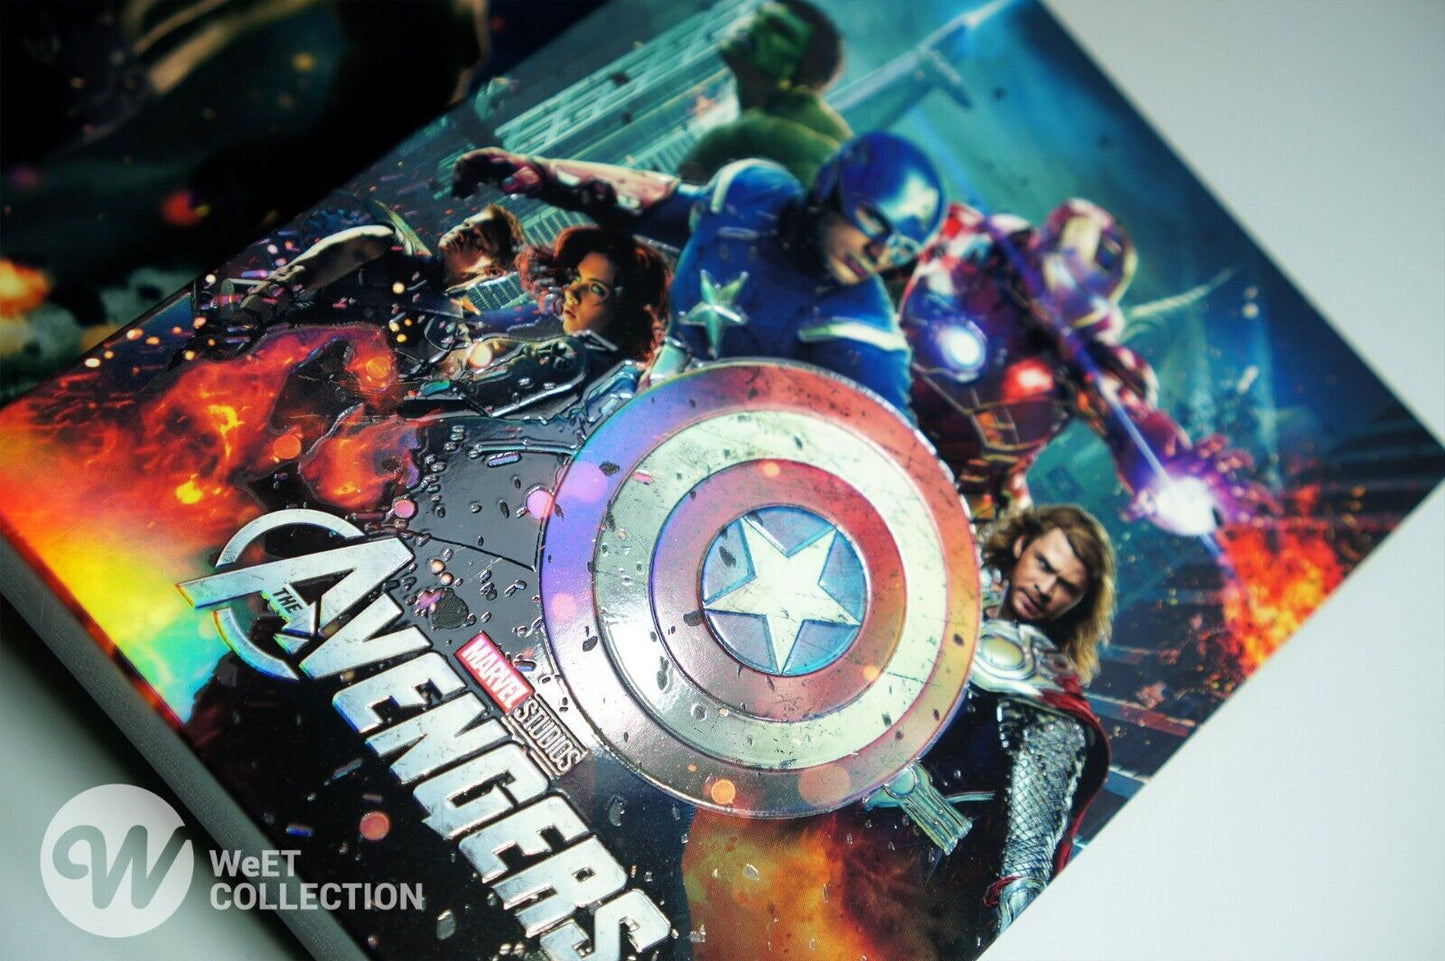 Avengers 4K+2D+3D Blu-ray SteelBook WeET Collection Exclusive #14 Box Set